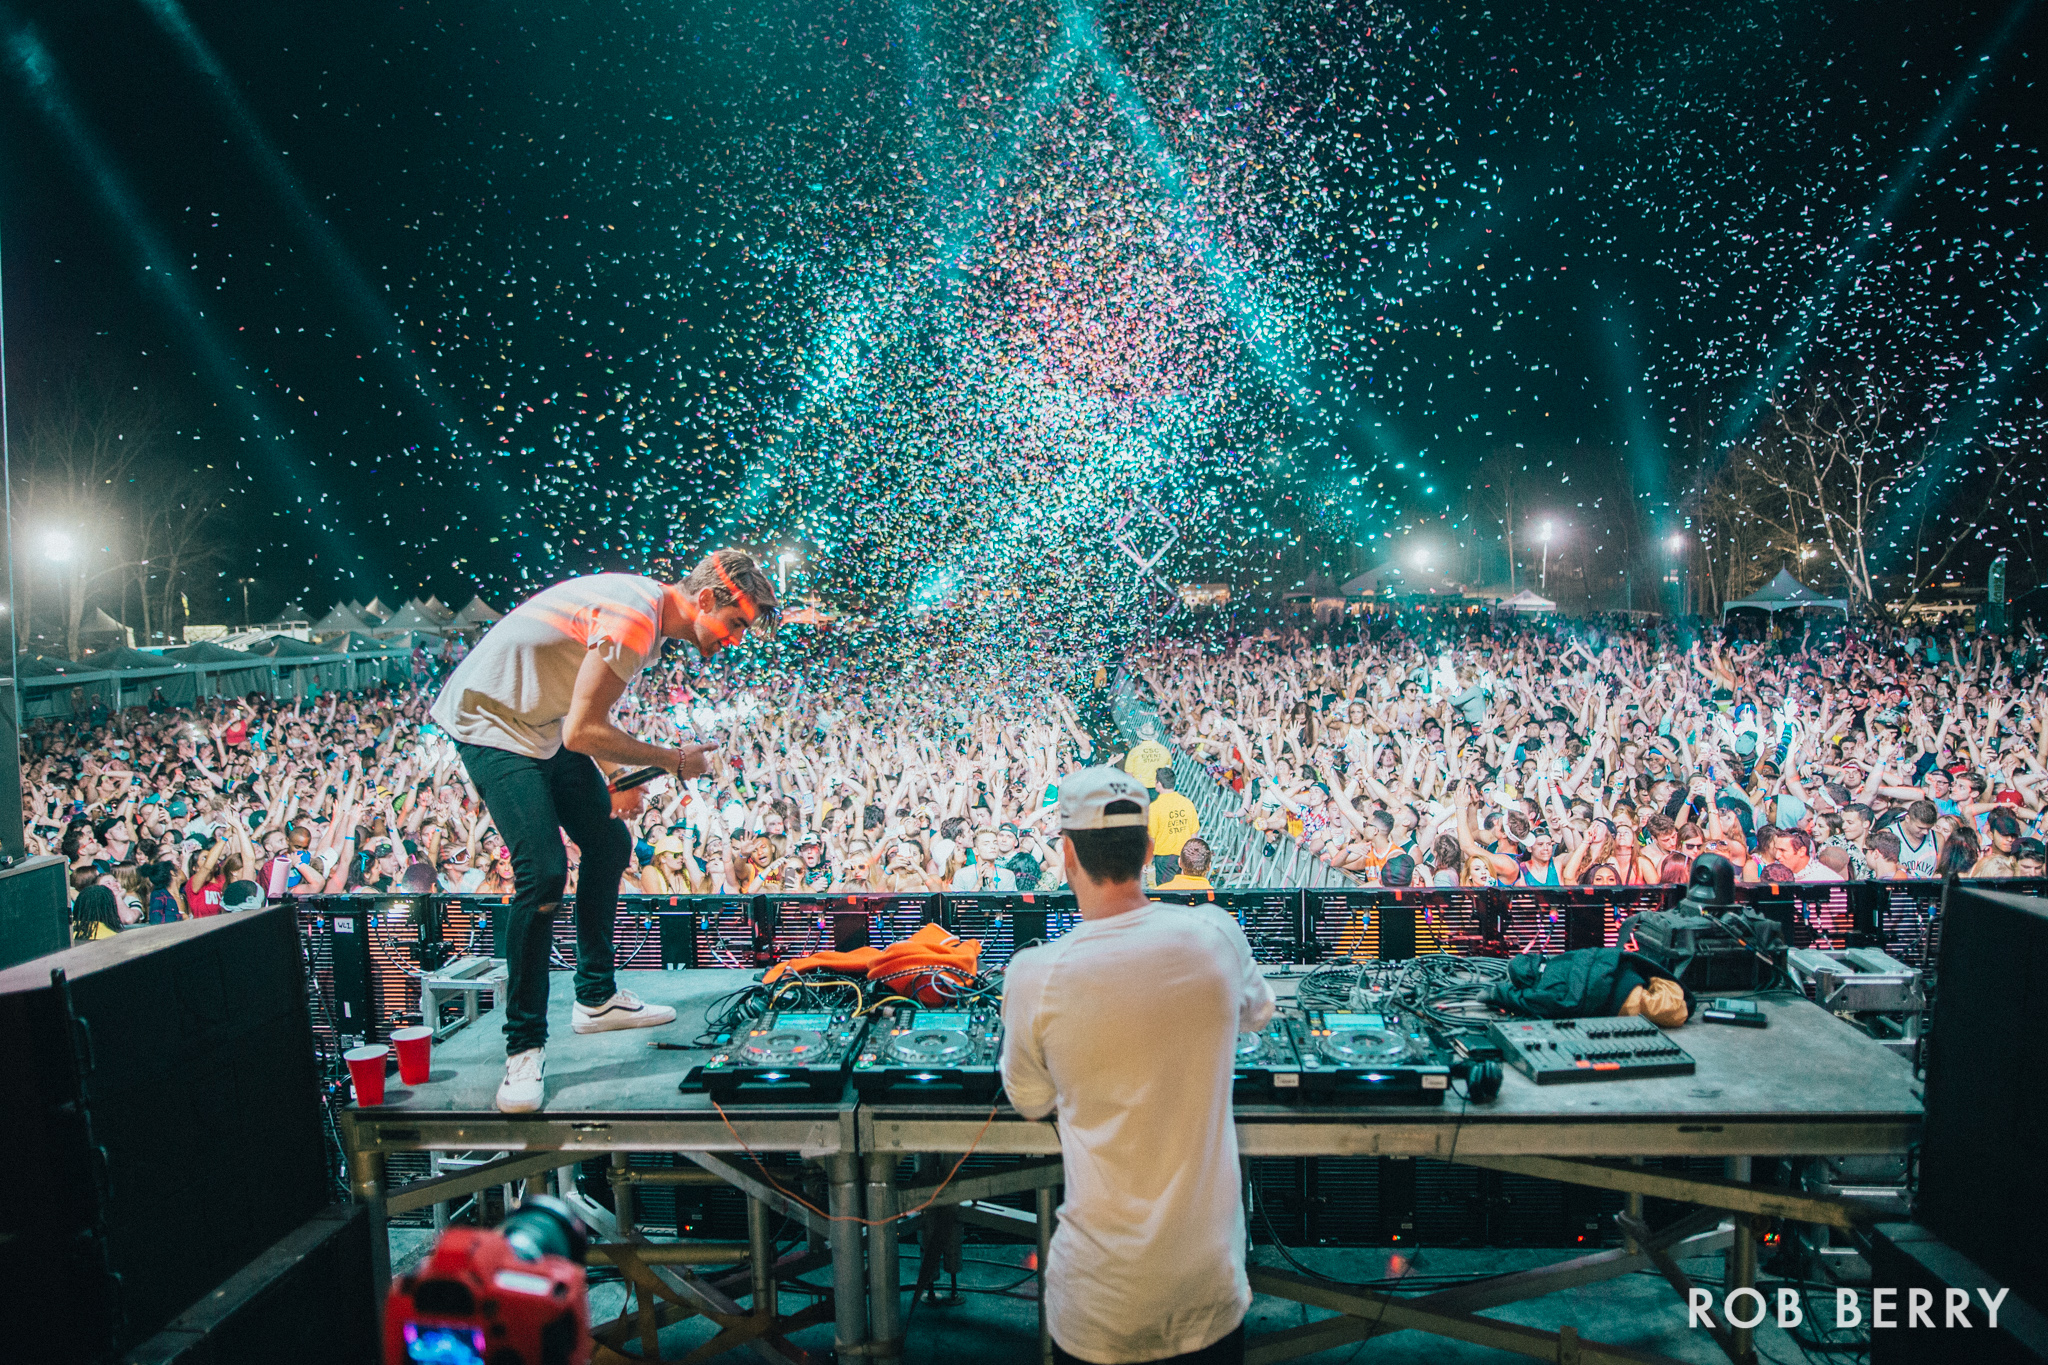 16 The Chainsmokers HD Wallpapers